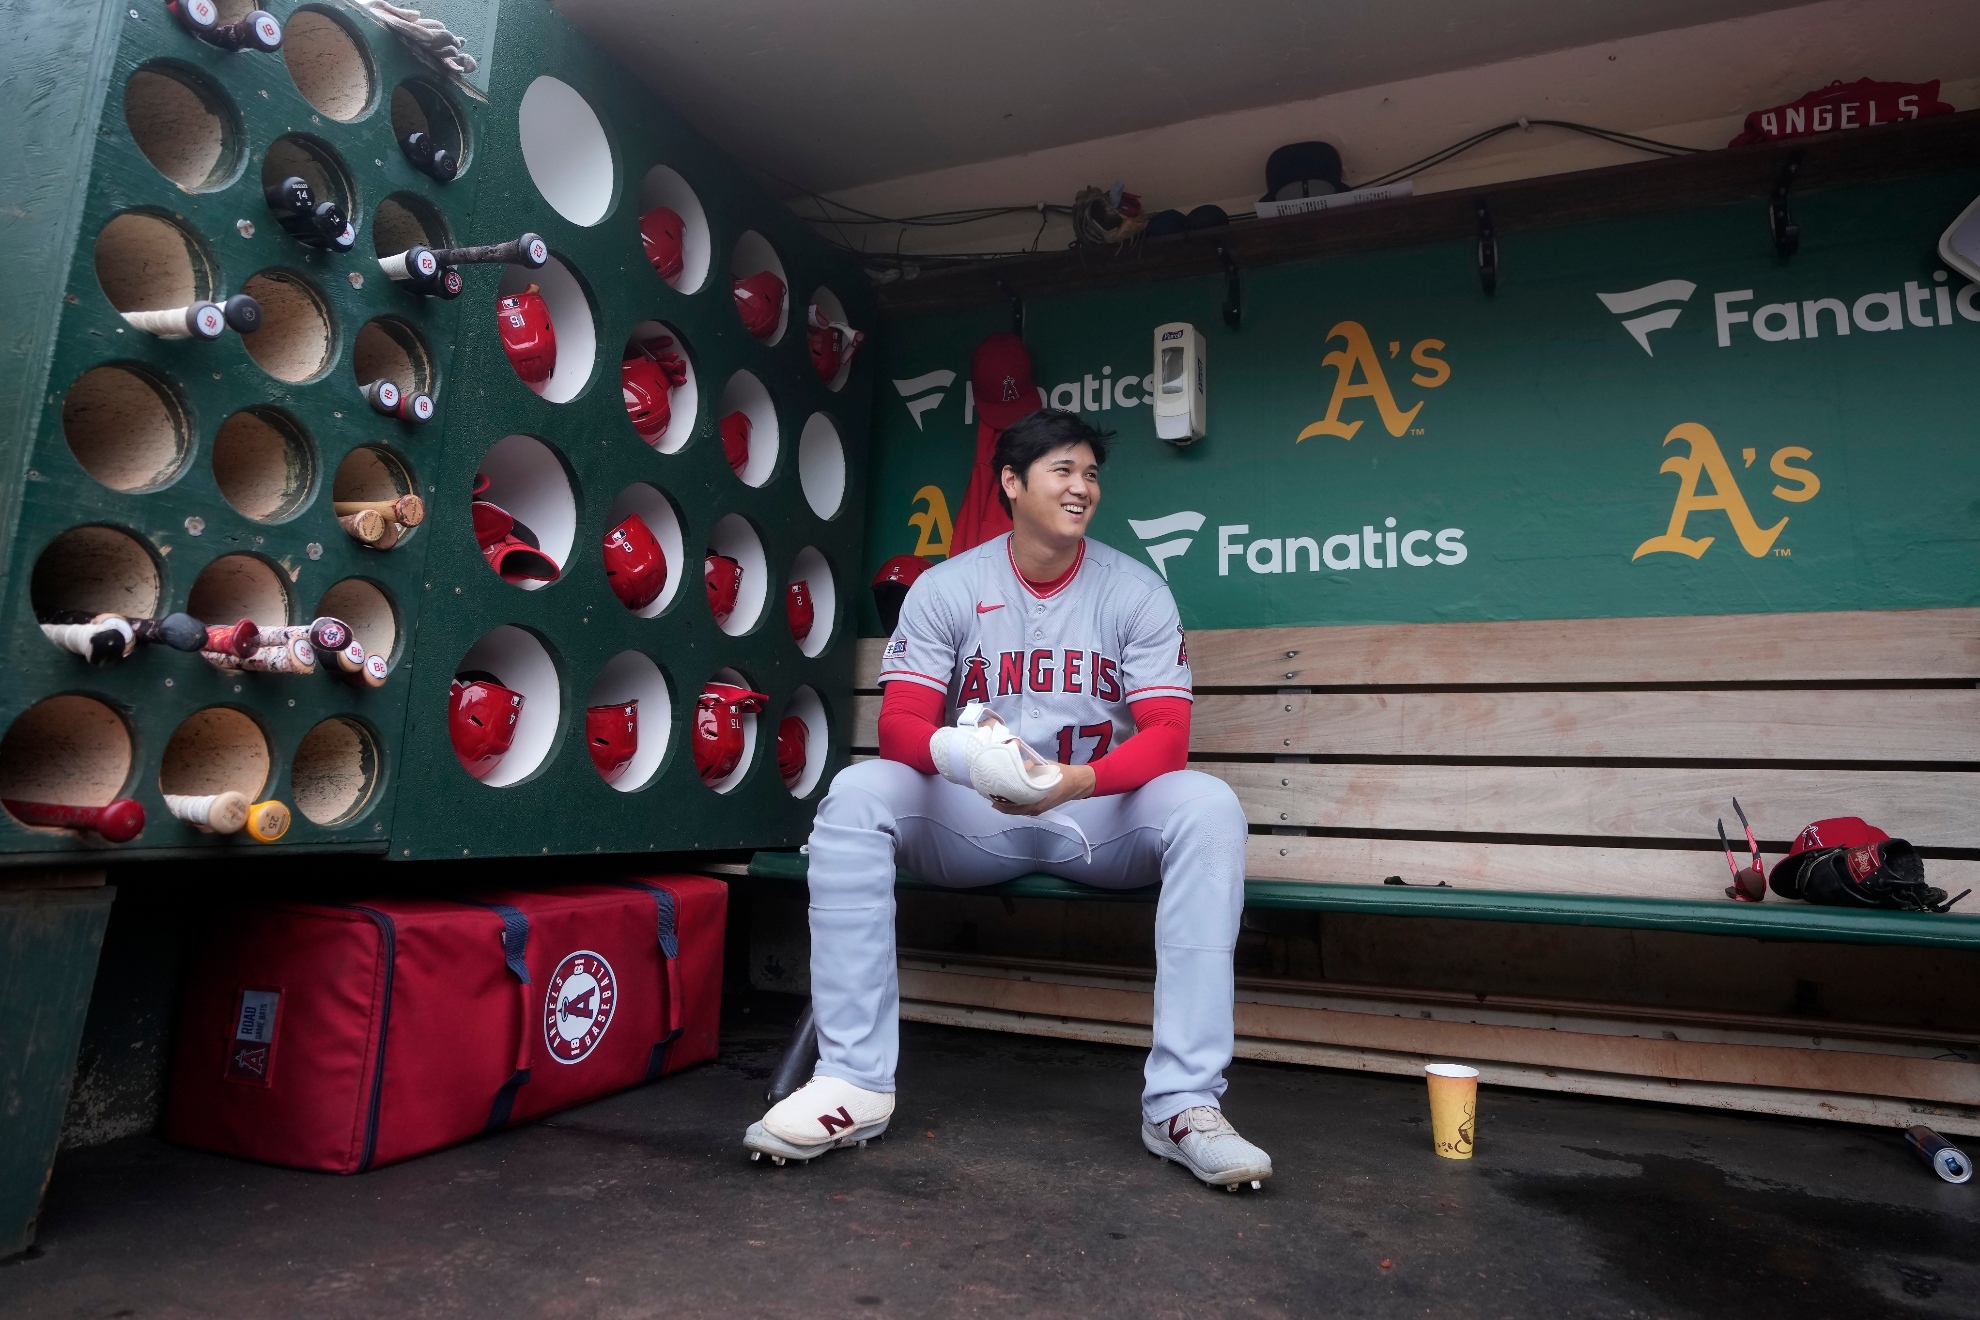 Shohei Ohtani after a game against the Oakland As